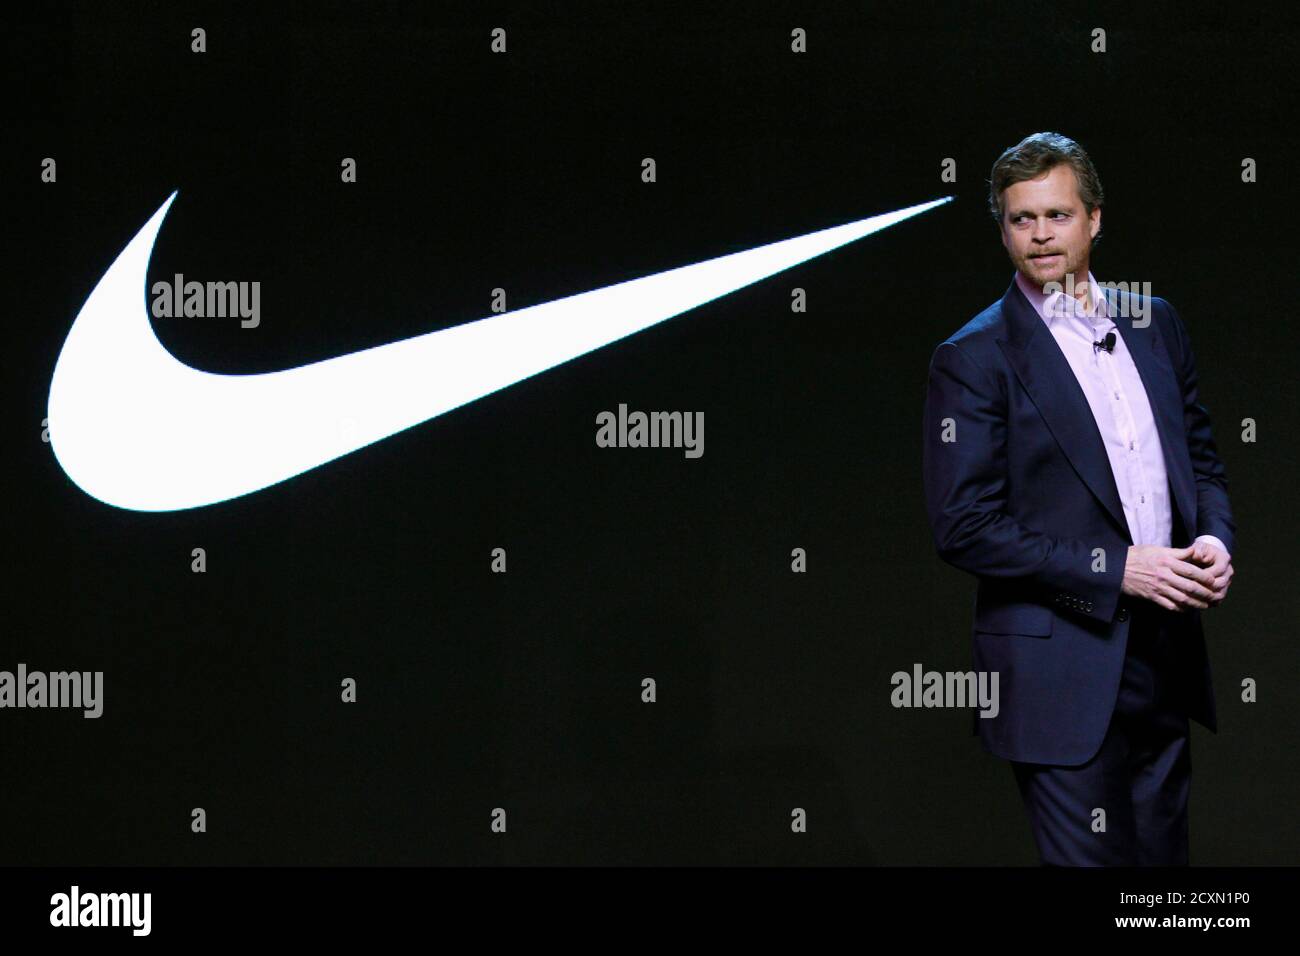 NIKE, Inc. President & CEO Mark Parker appears at an event to unveil the new NIKE+ FuelBand, an innovative wristband that tracks and measures everyday for, what Nike says, and